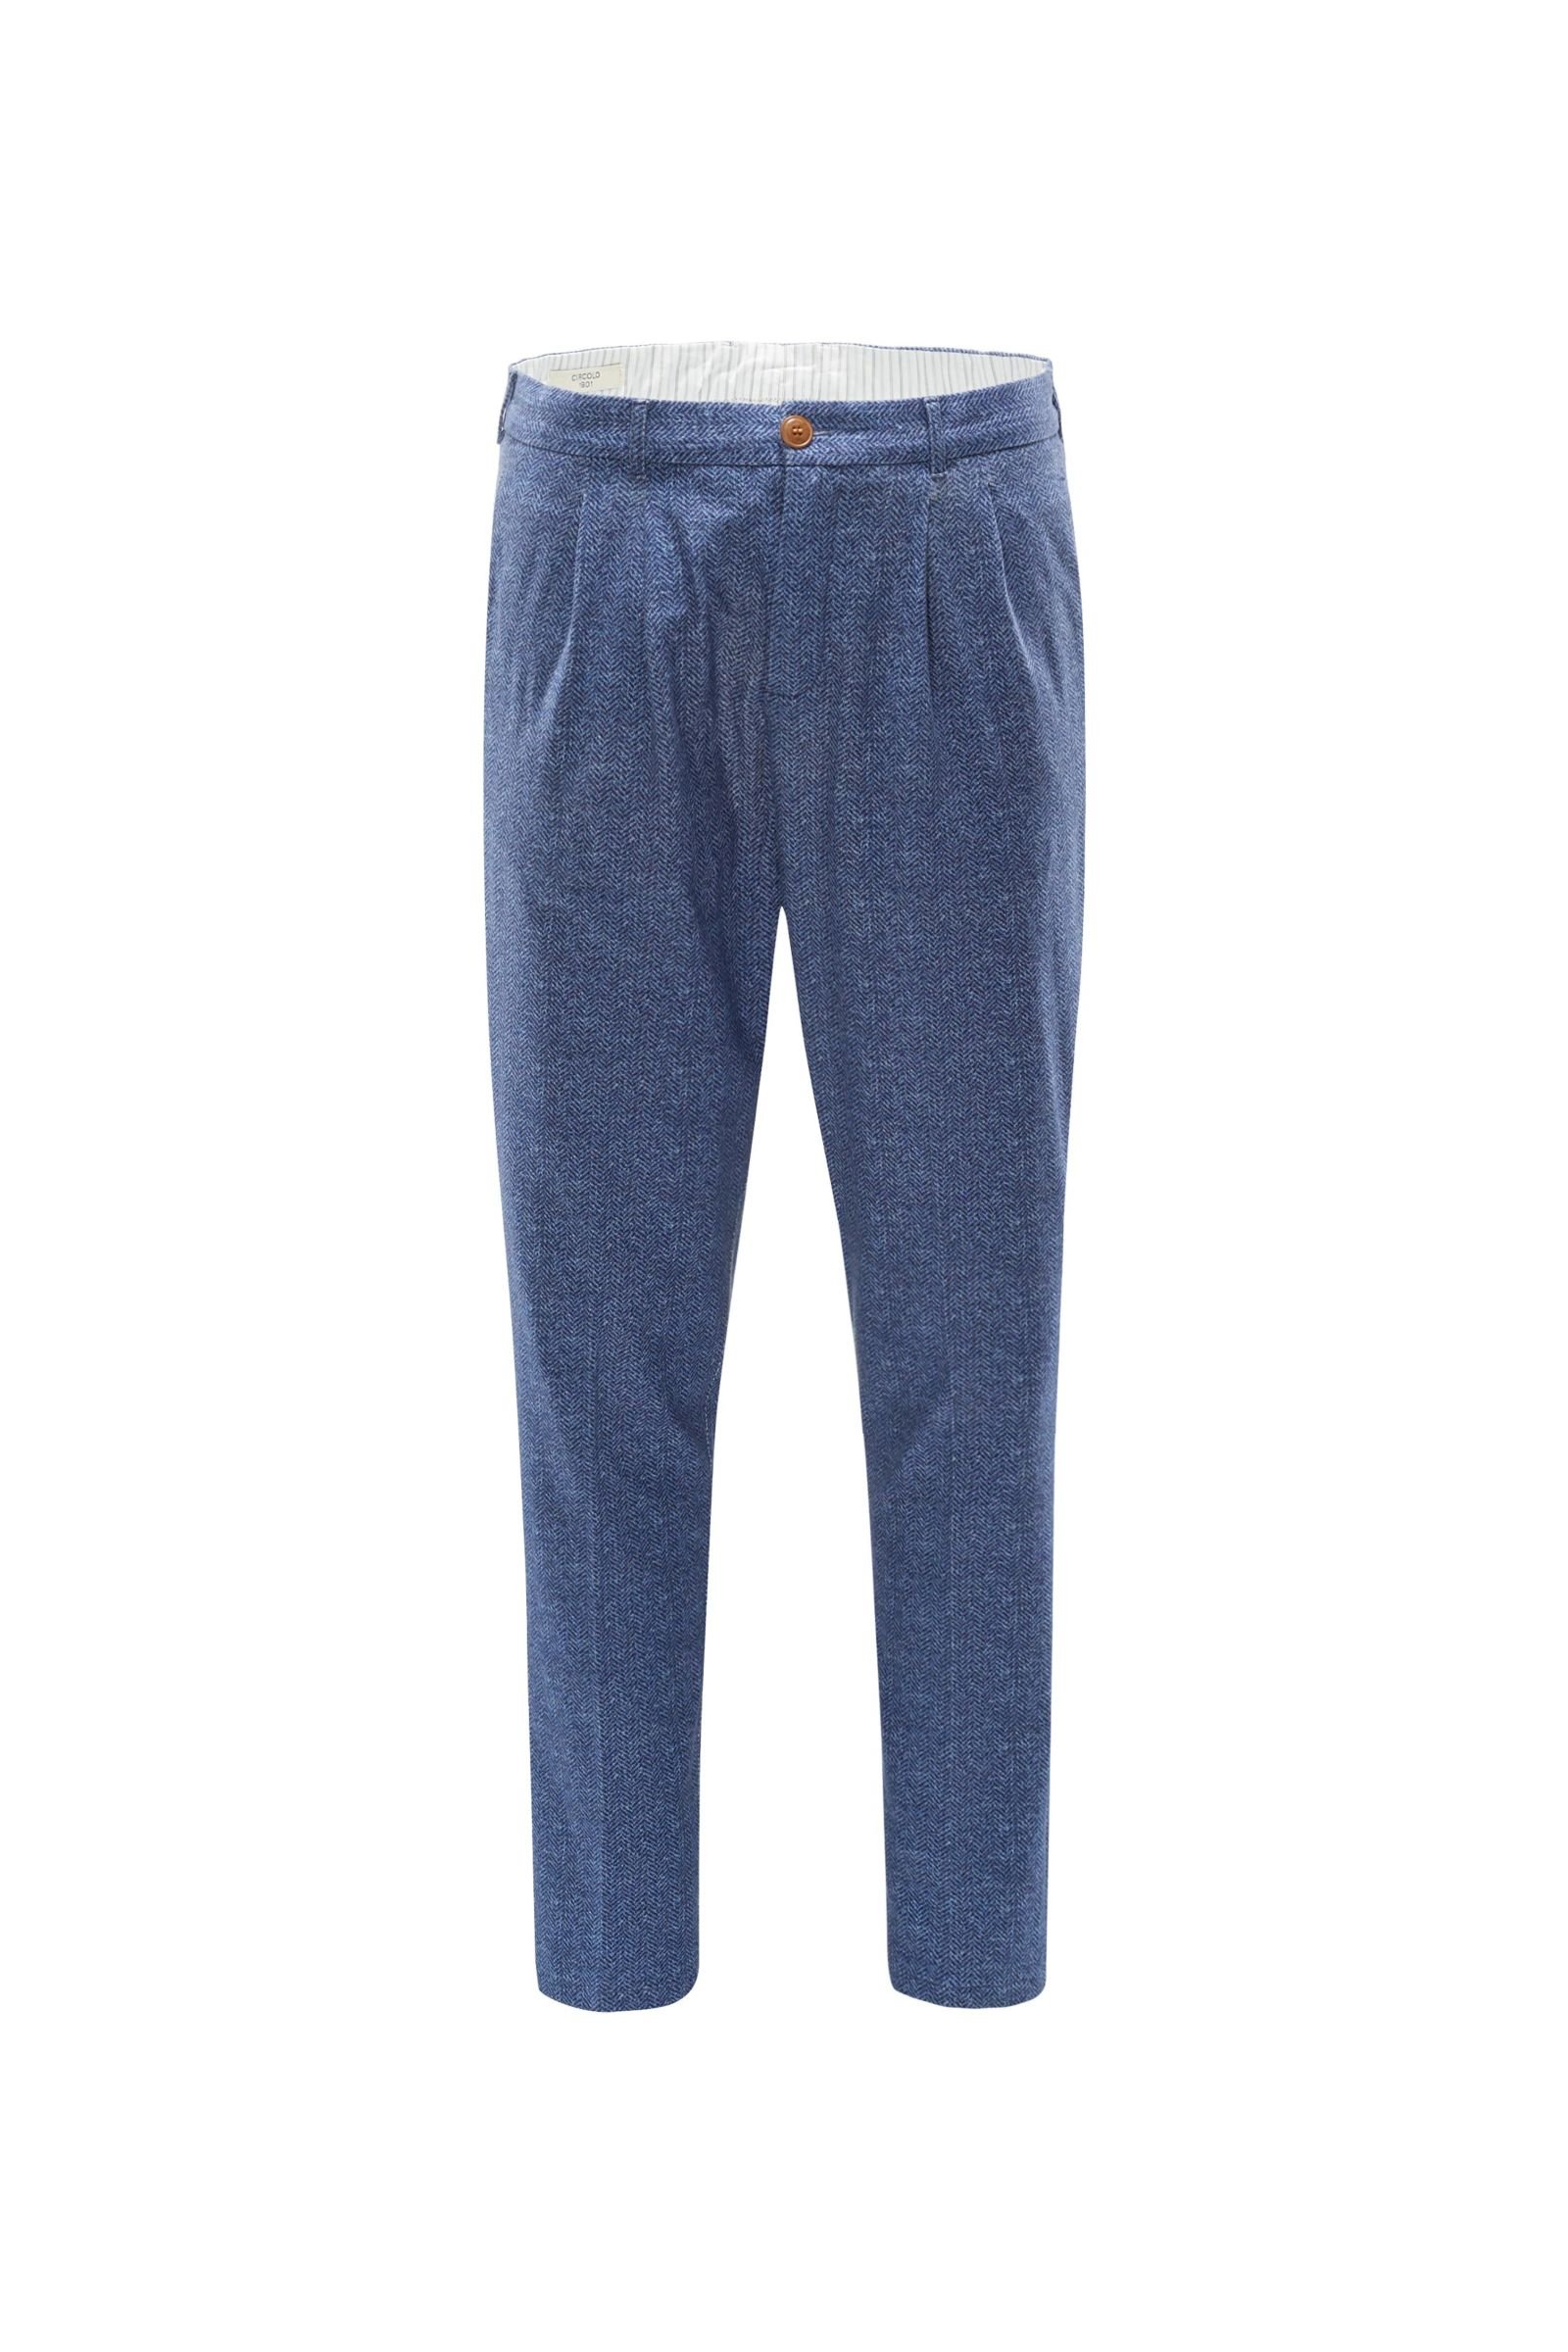 Jersey trousers grey-blue patterned